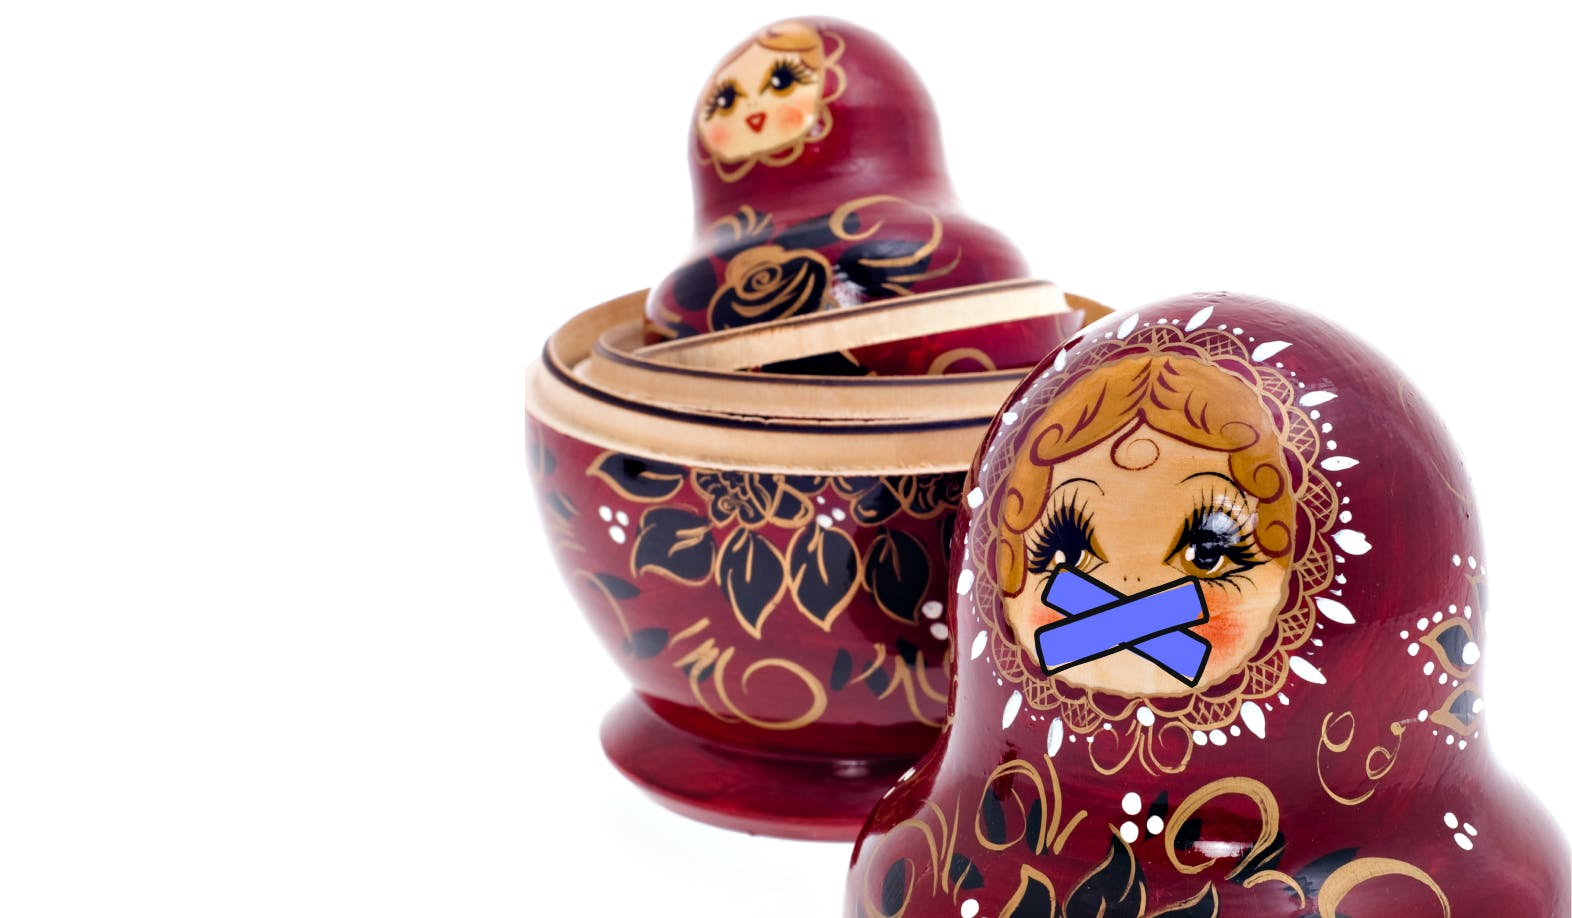 blogpost-image of a Russian babushka doll being silenced by an illustrated ducktape across her mouth